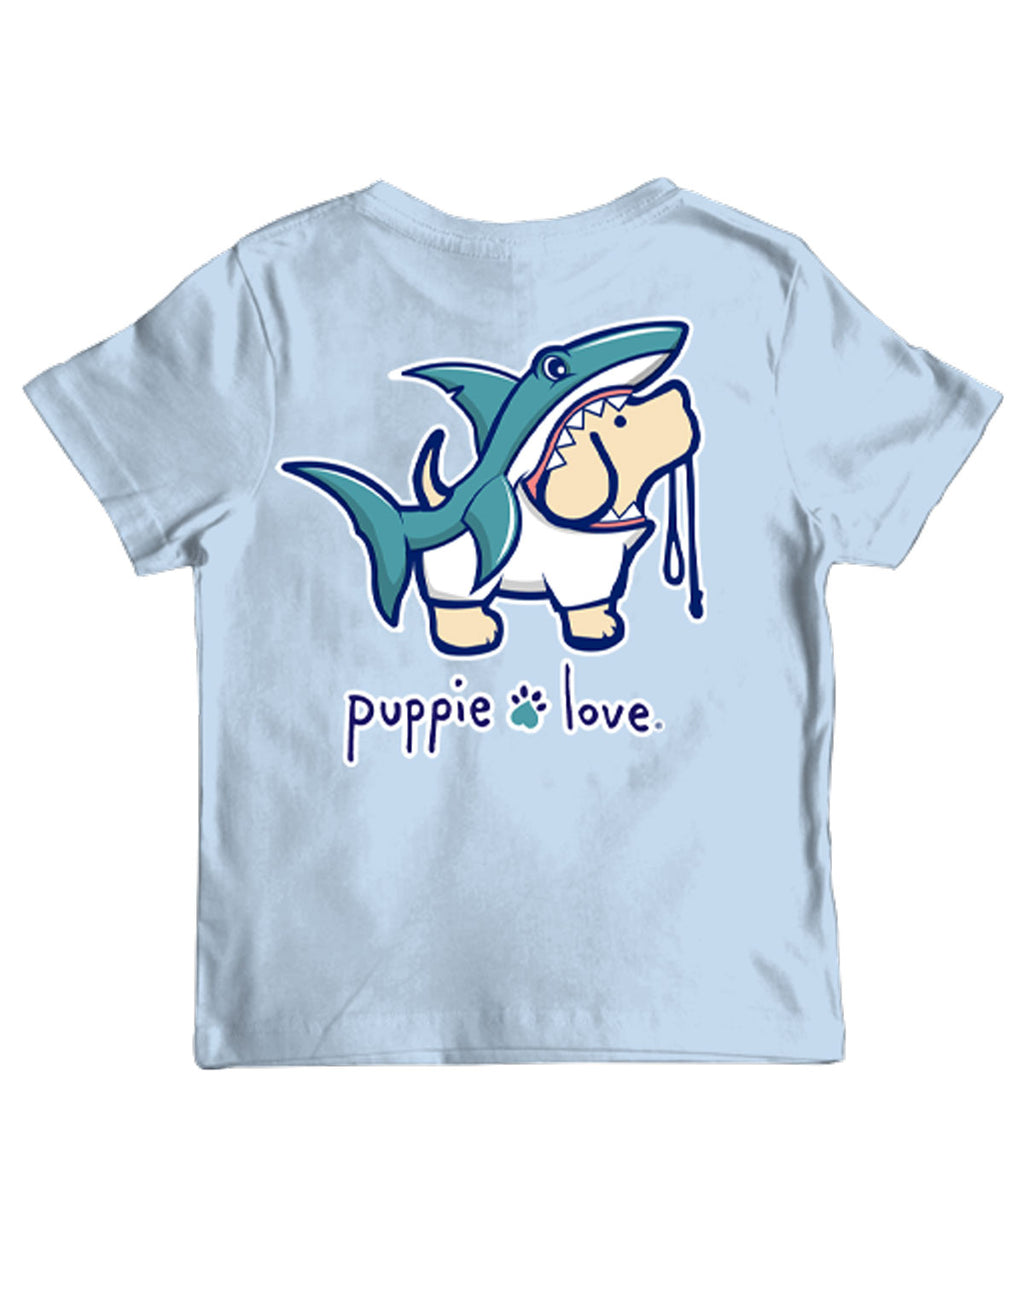 SHARK PUP, YOUTH SS - Puppie Love